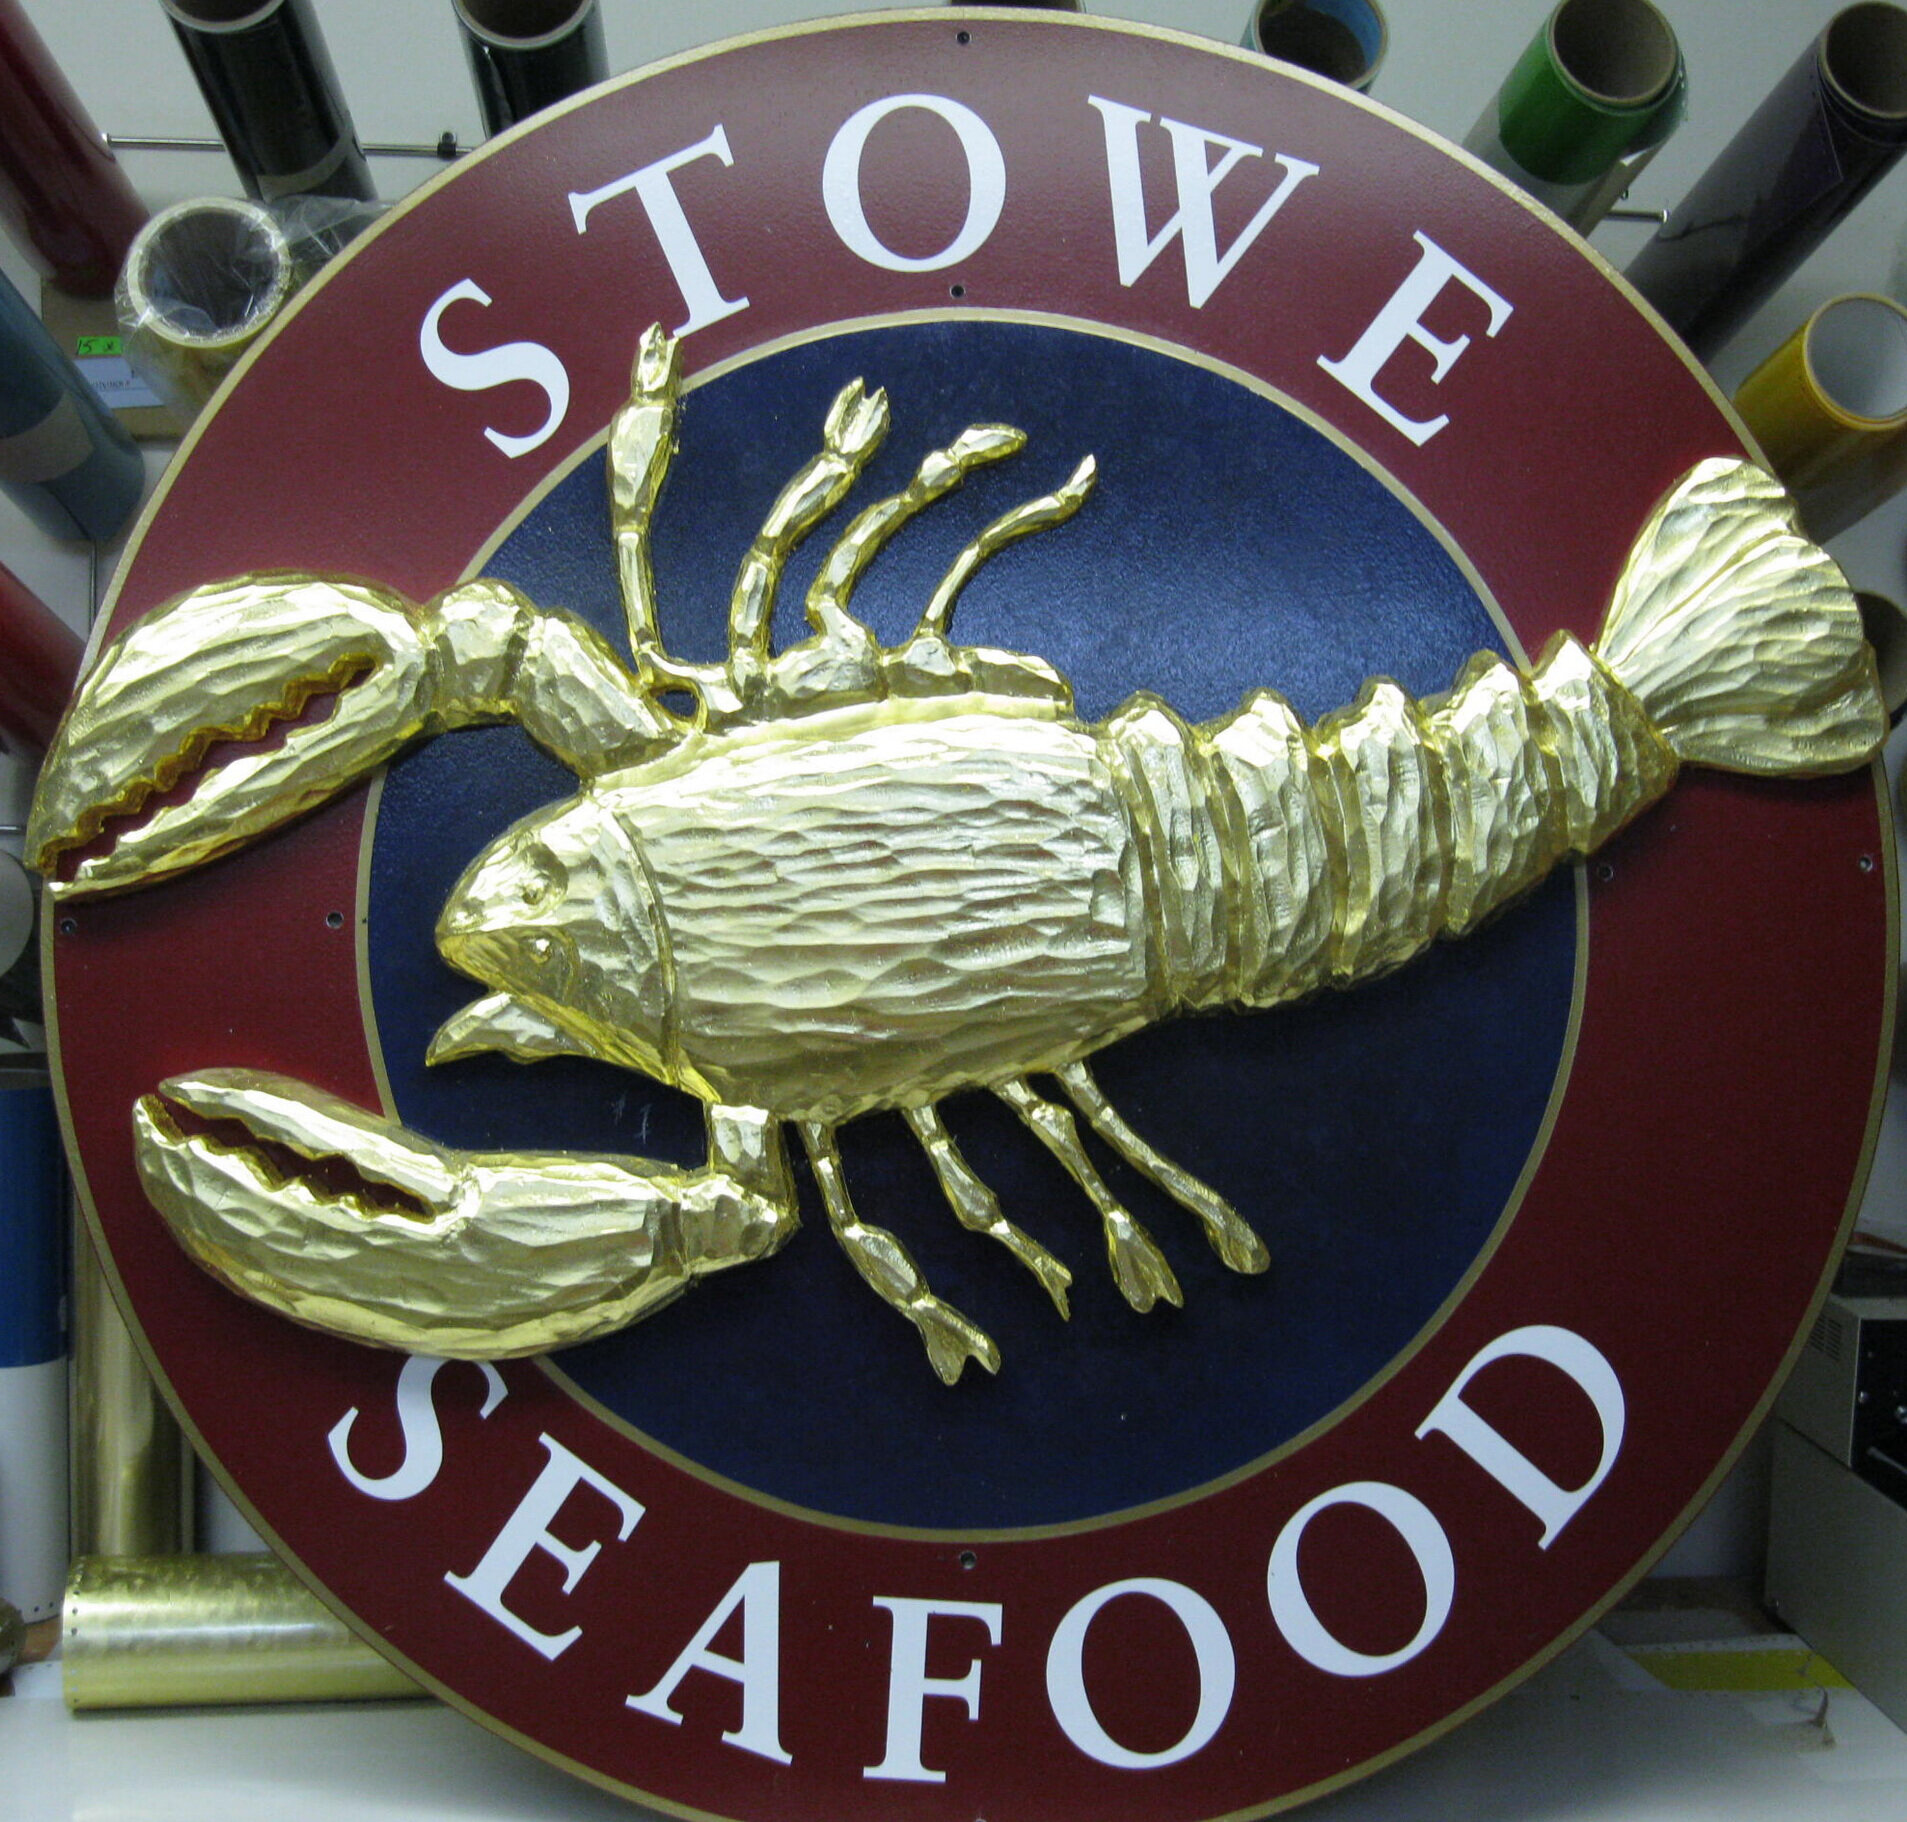  Sculpted and gilded lobster for an ‘add-on’ to the sign. 